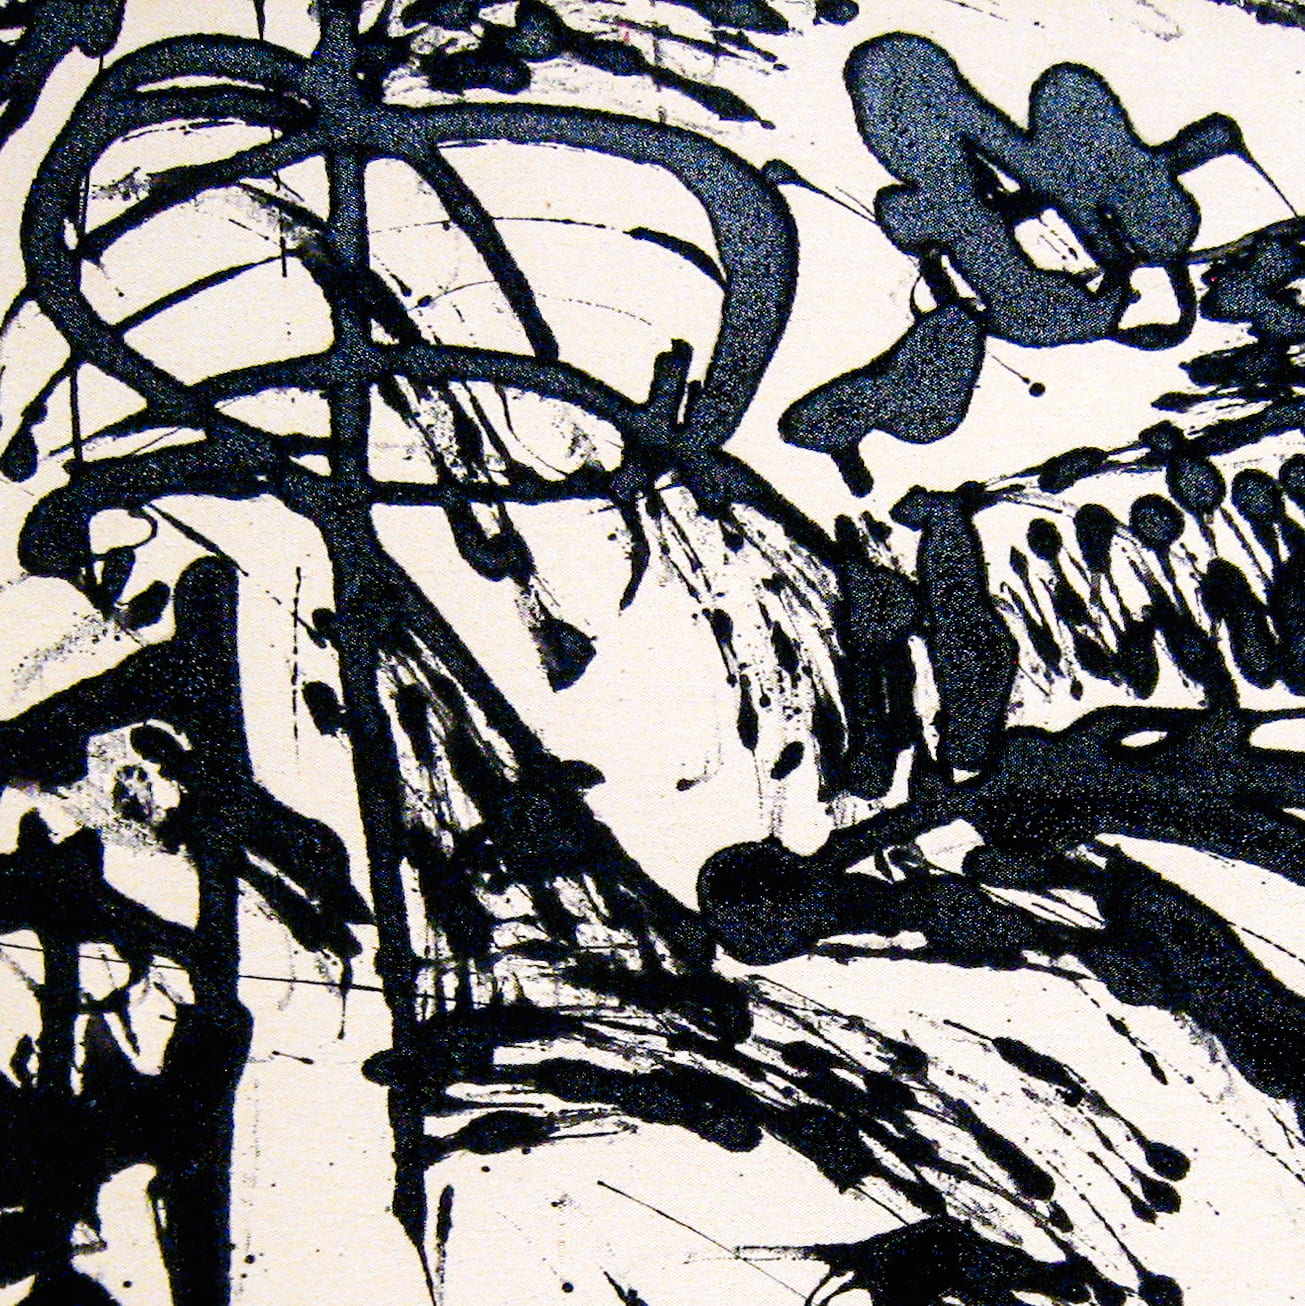 Detail from Echo: Number 25, 1951 by Jackson Pollock.